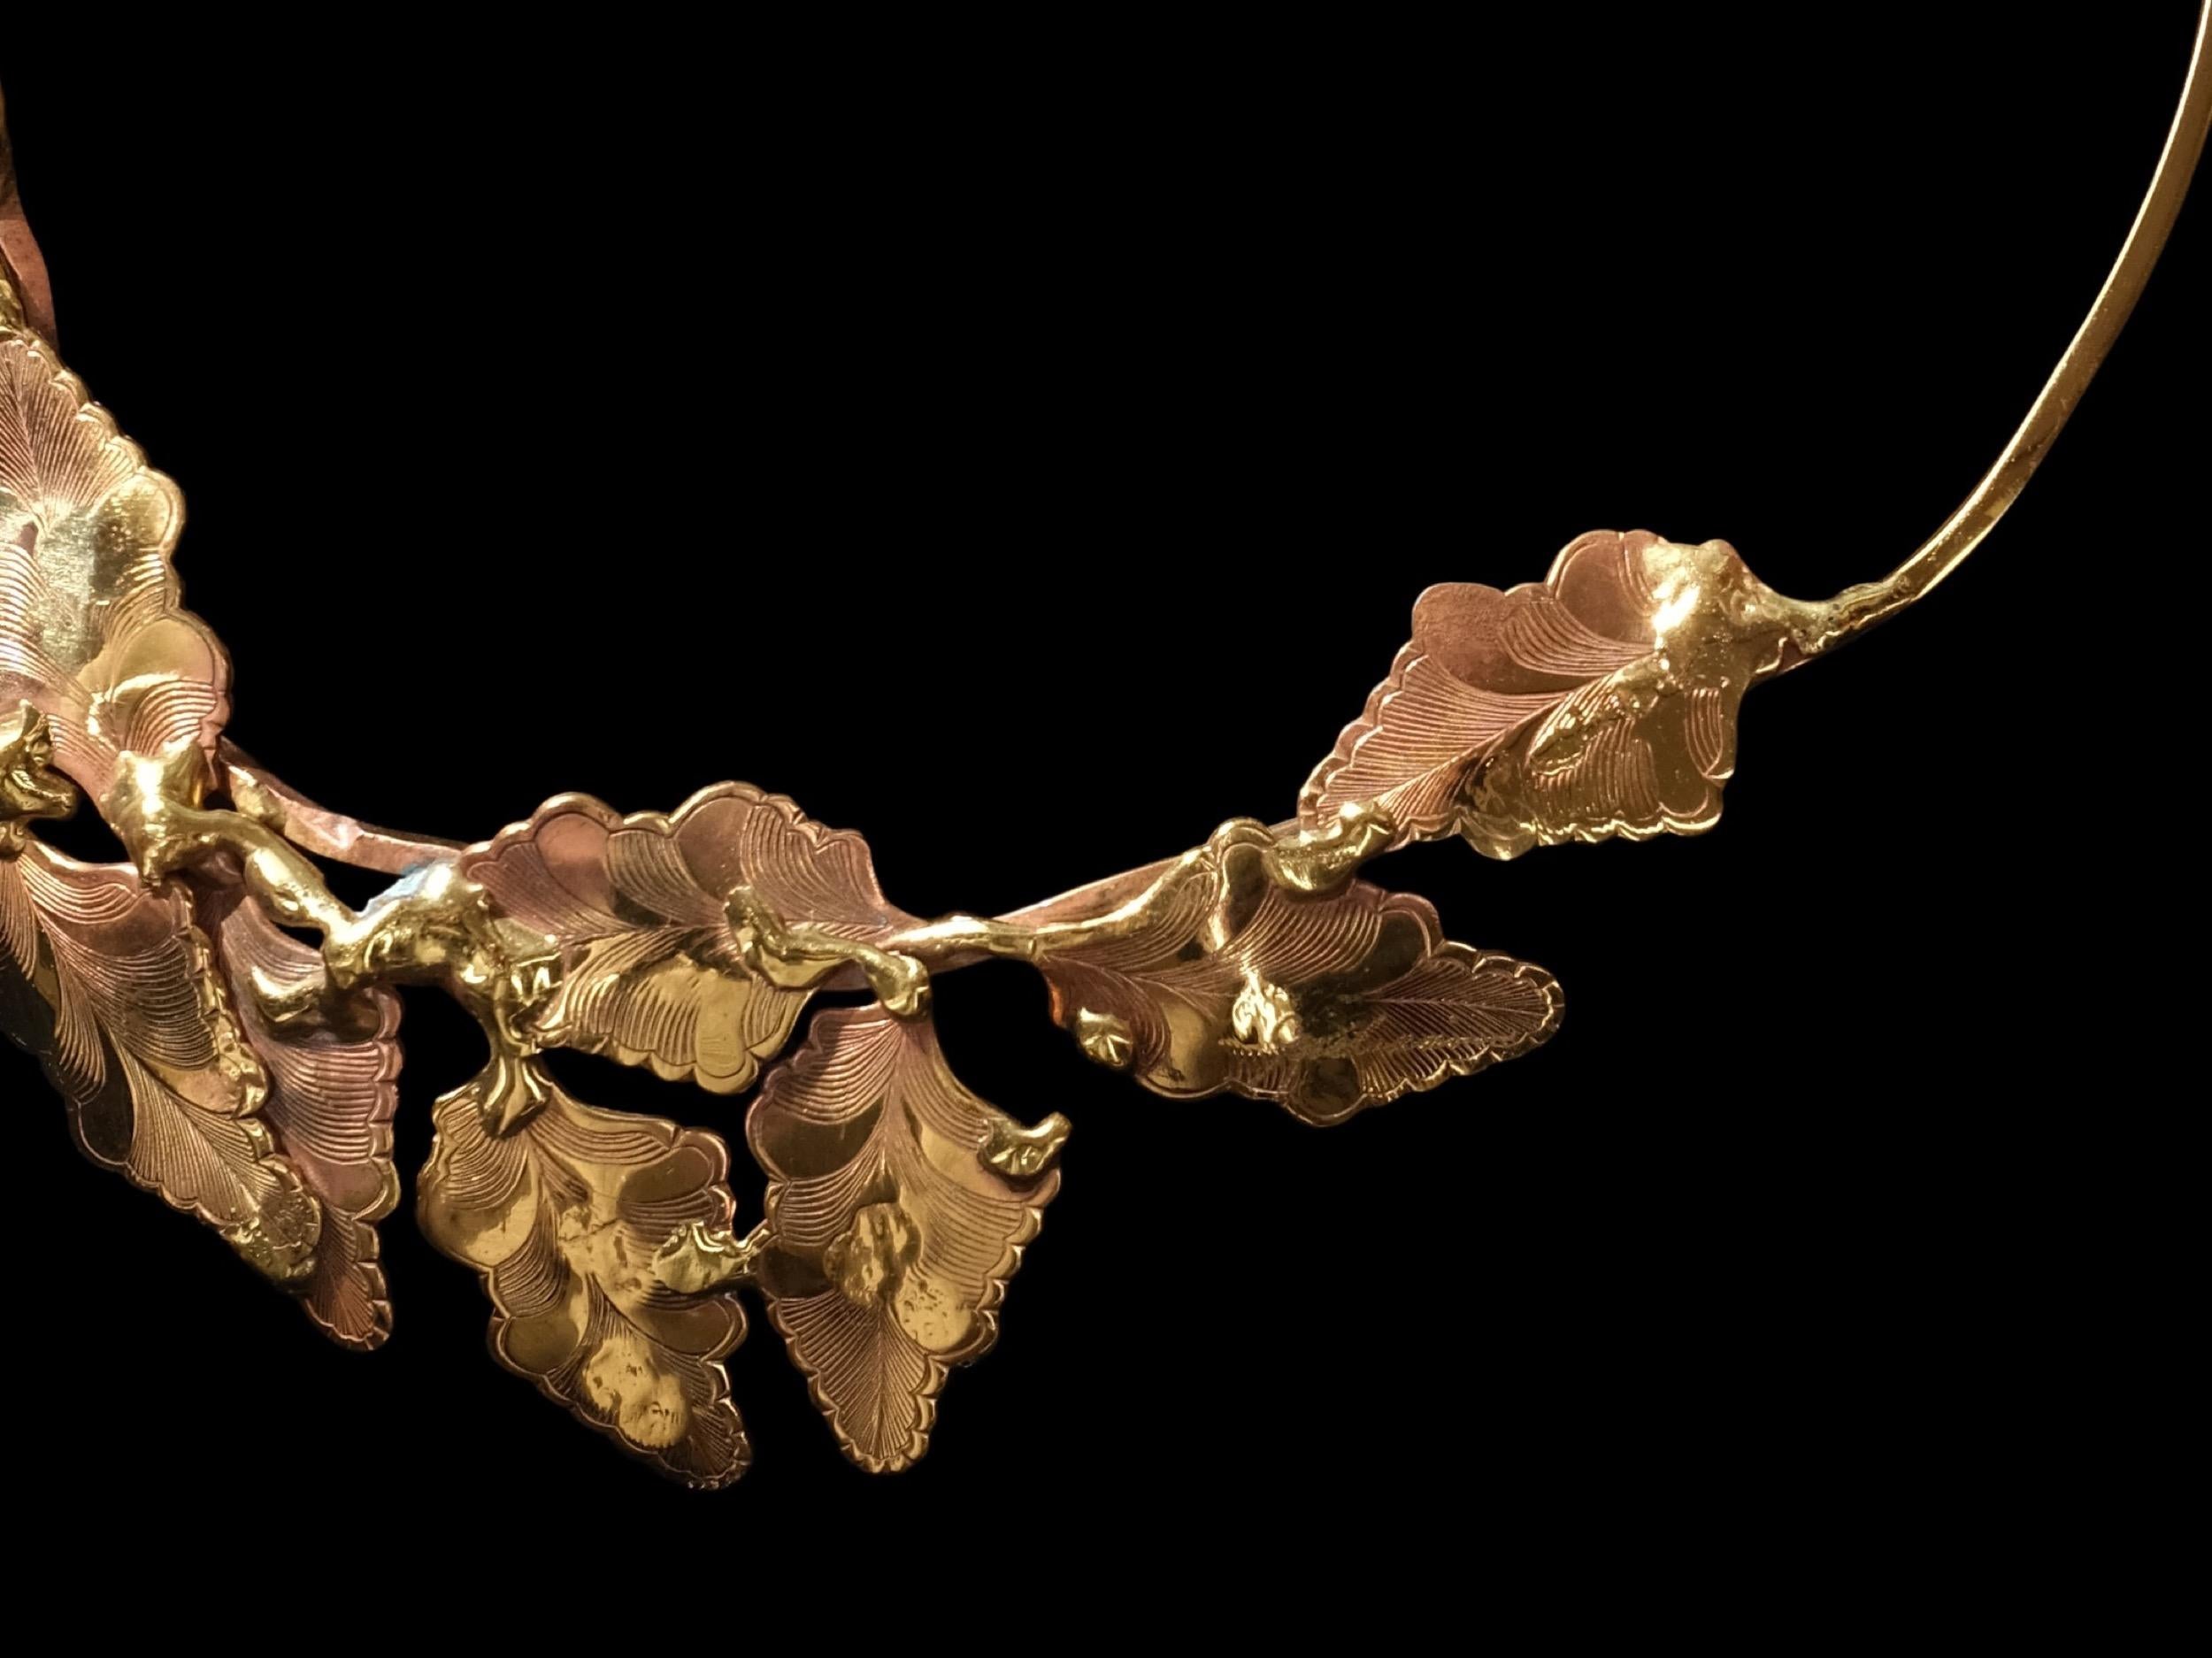 Handmade, Hand-forged Brass Choker
Made by unknown artist
Two tone brass with delicate etched lines
Hand tooled leaves wrap around collar bone
Brutalist Welded details
In the style of a rudimentary Claude Lalanne 
Handmade hook closure
Measuring 6